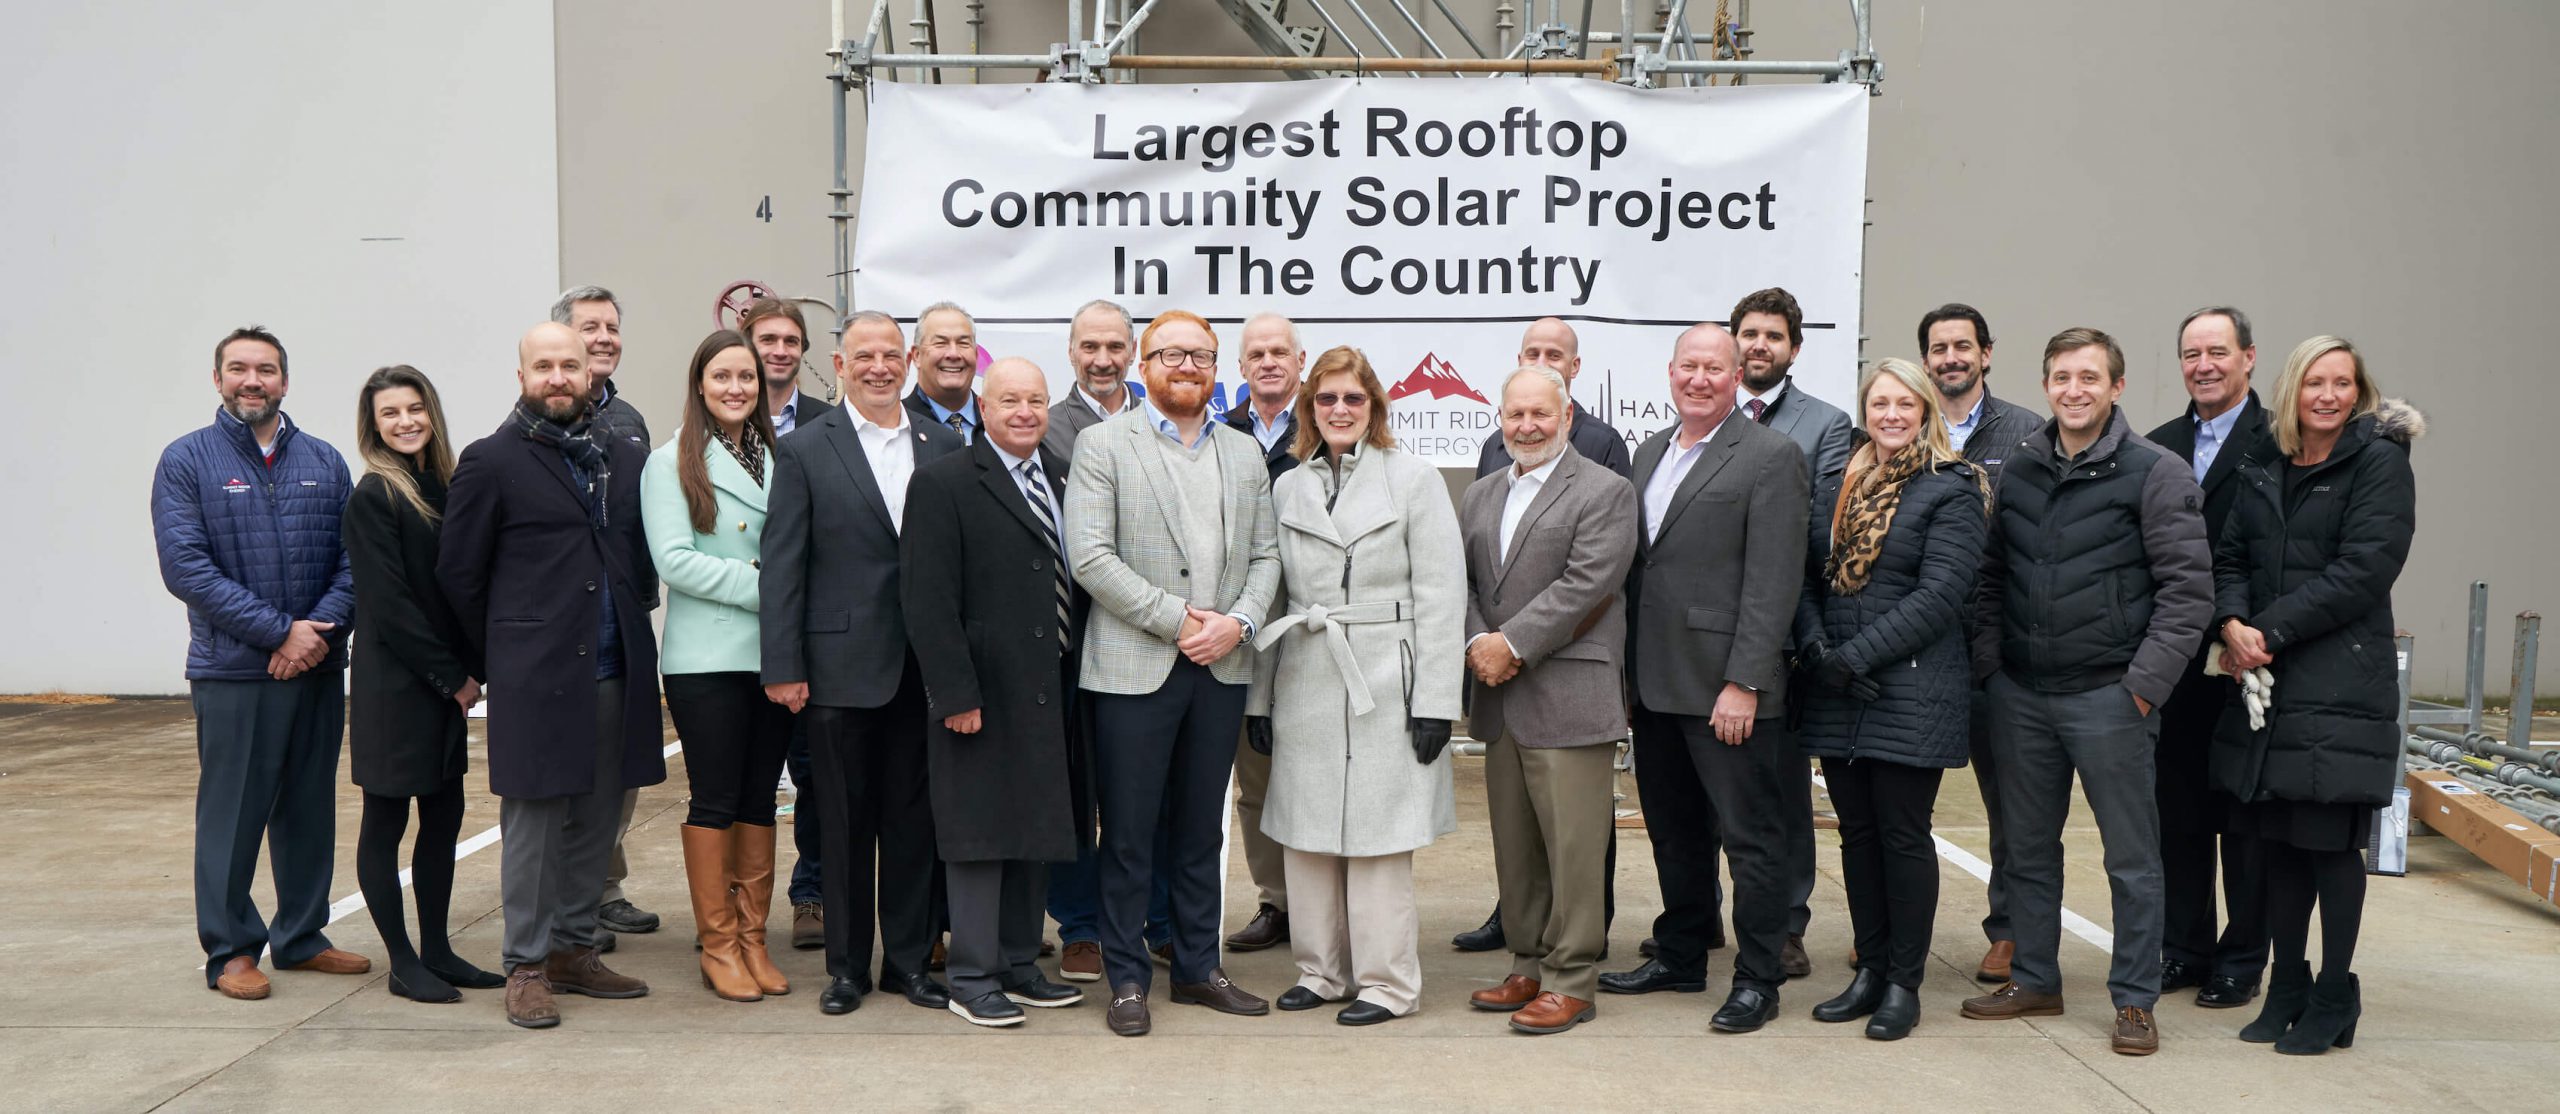 ReVision Energy teams up for 13 solar projects in Maine